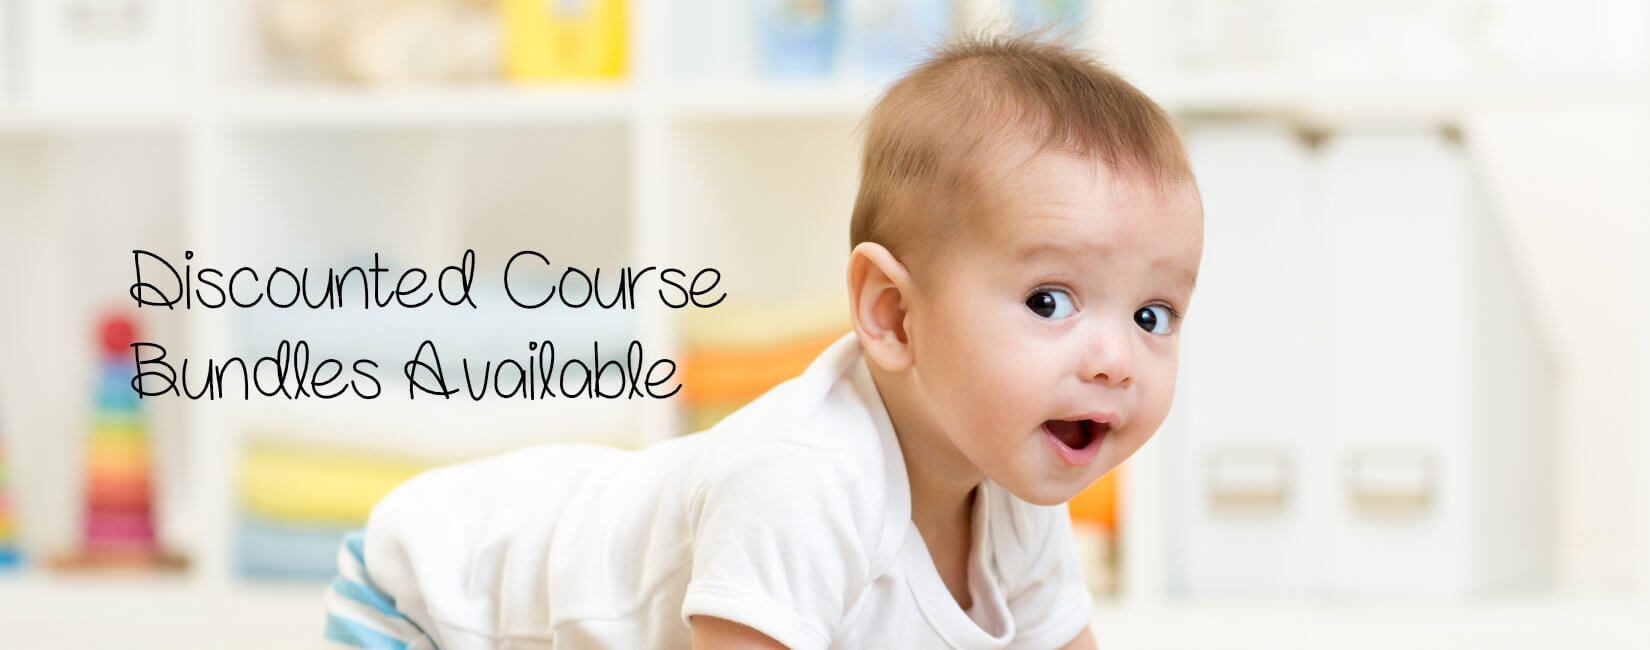 See our discounted paediatric training course bundles that we have available